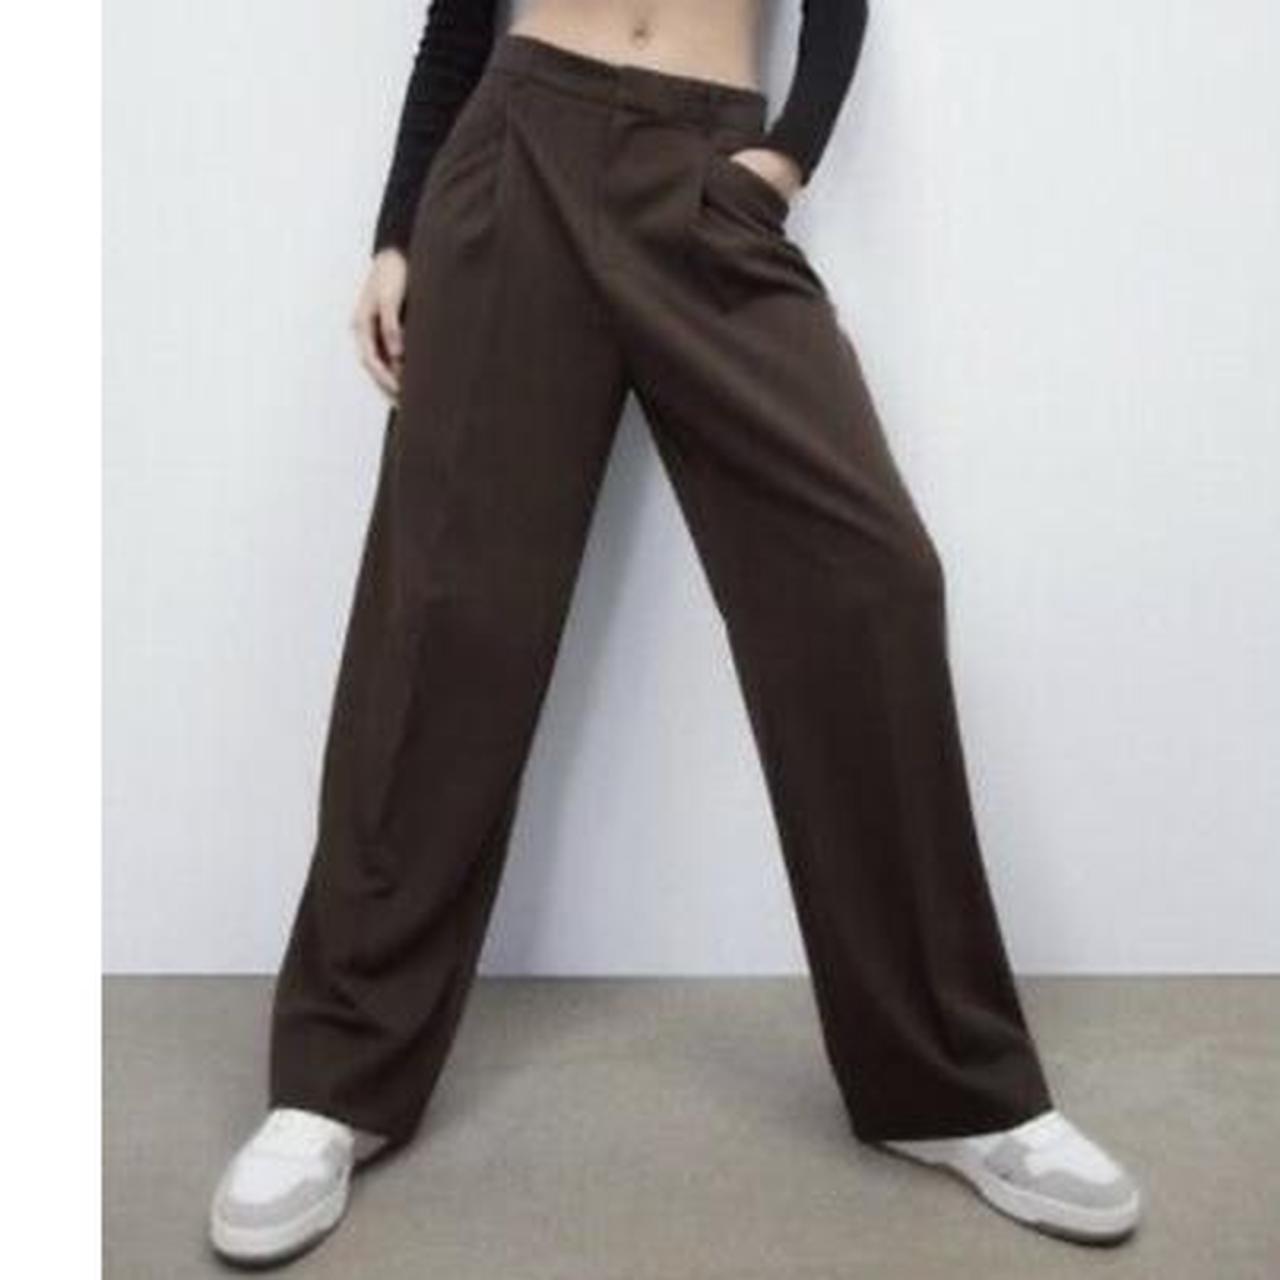 Zara | Pants & Jumpsuits | Zara Gold Button Strap Pants In Small Taupe Brown  High Waisted Wide Leg | Poshmark